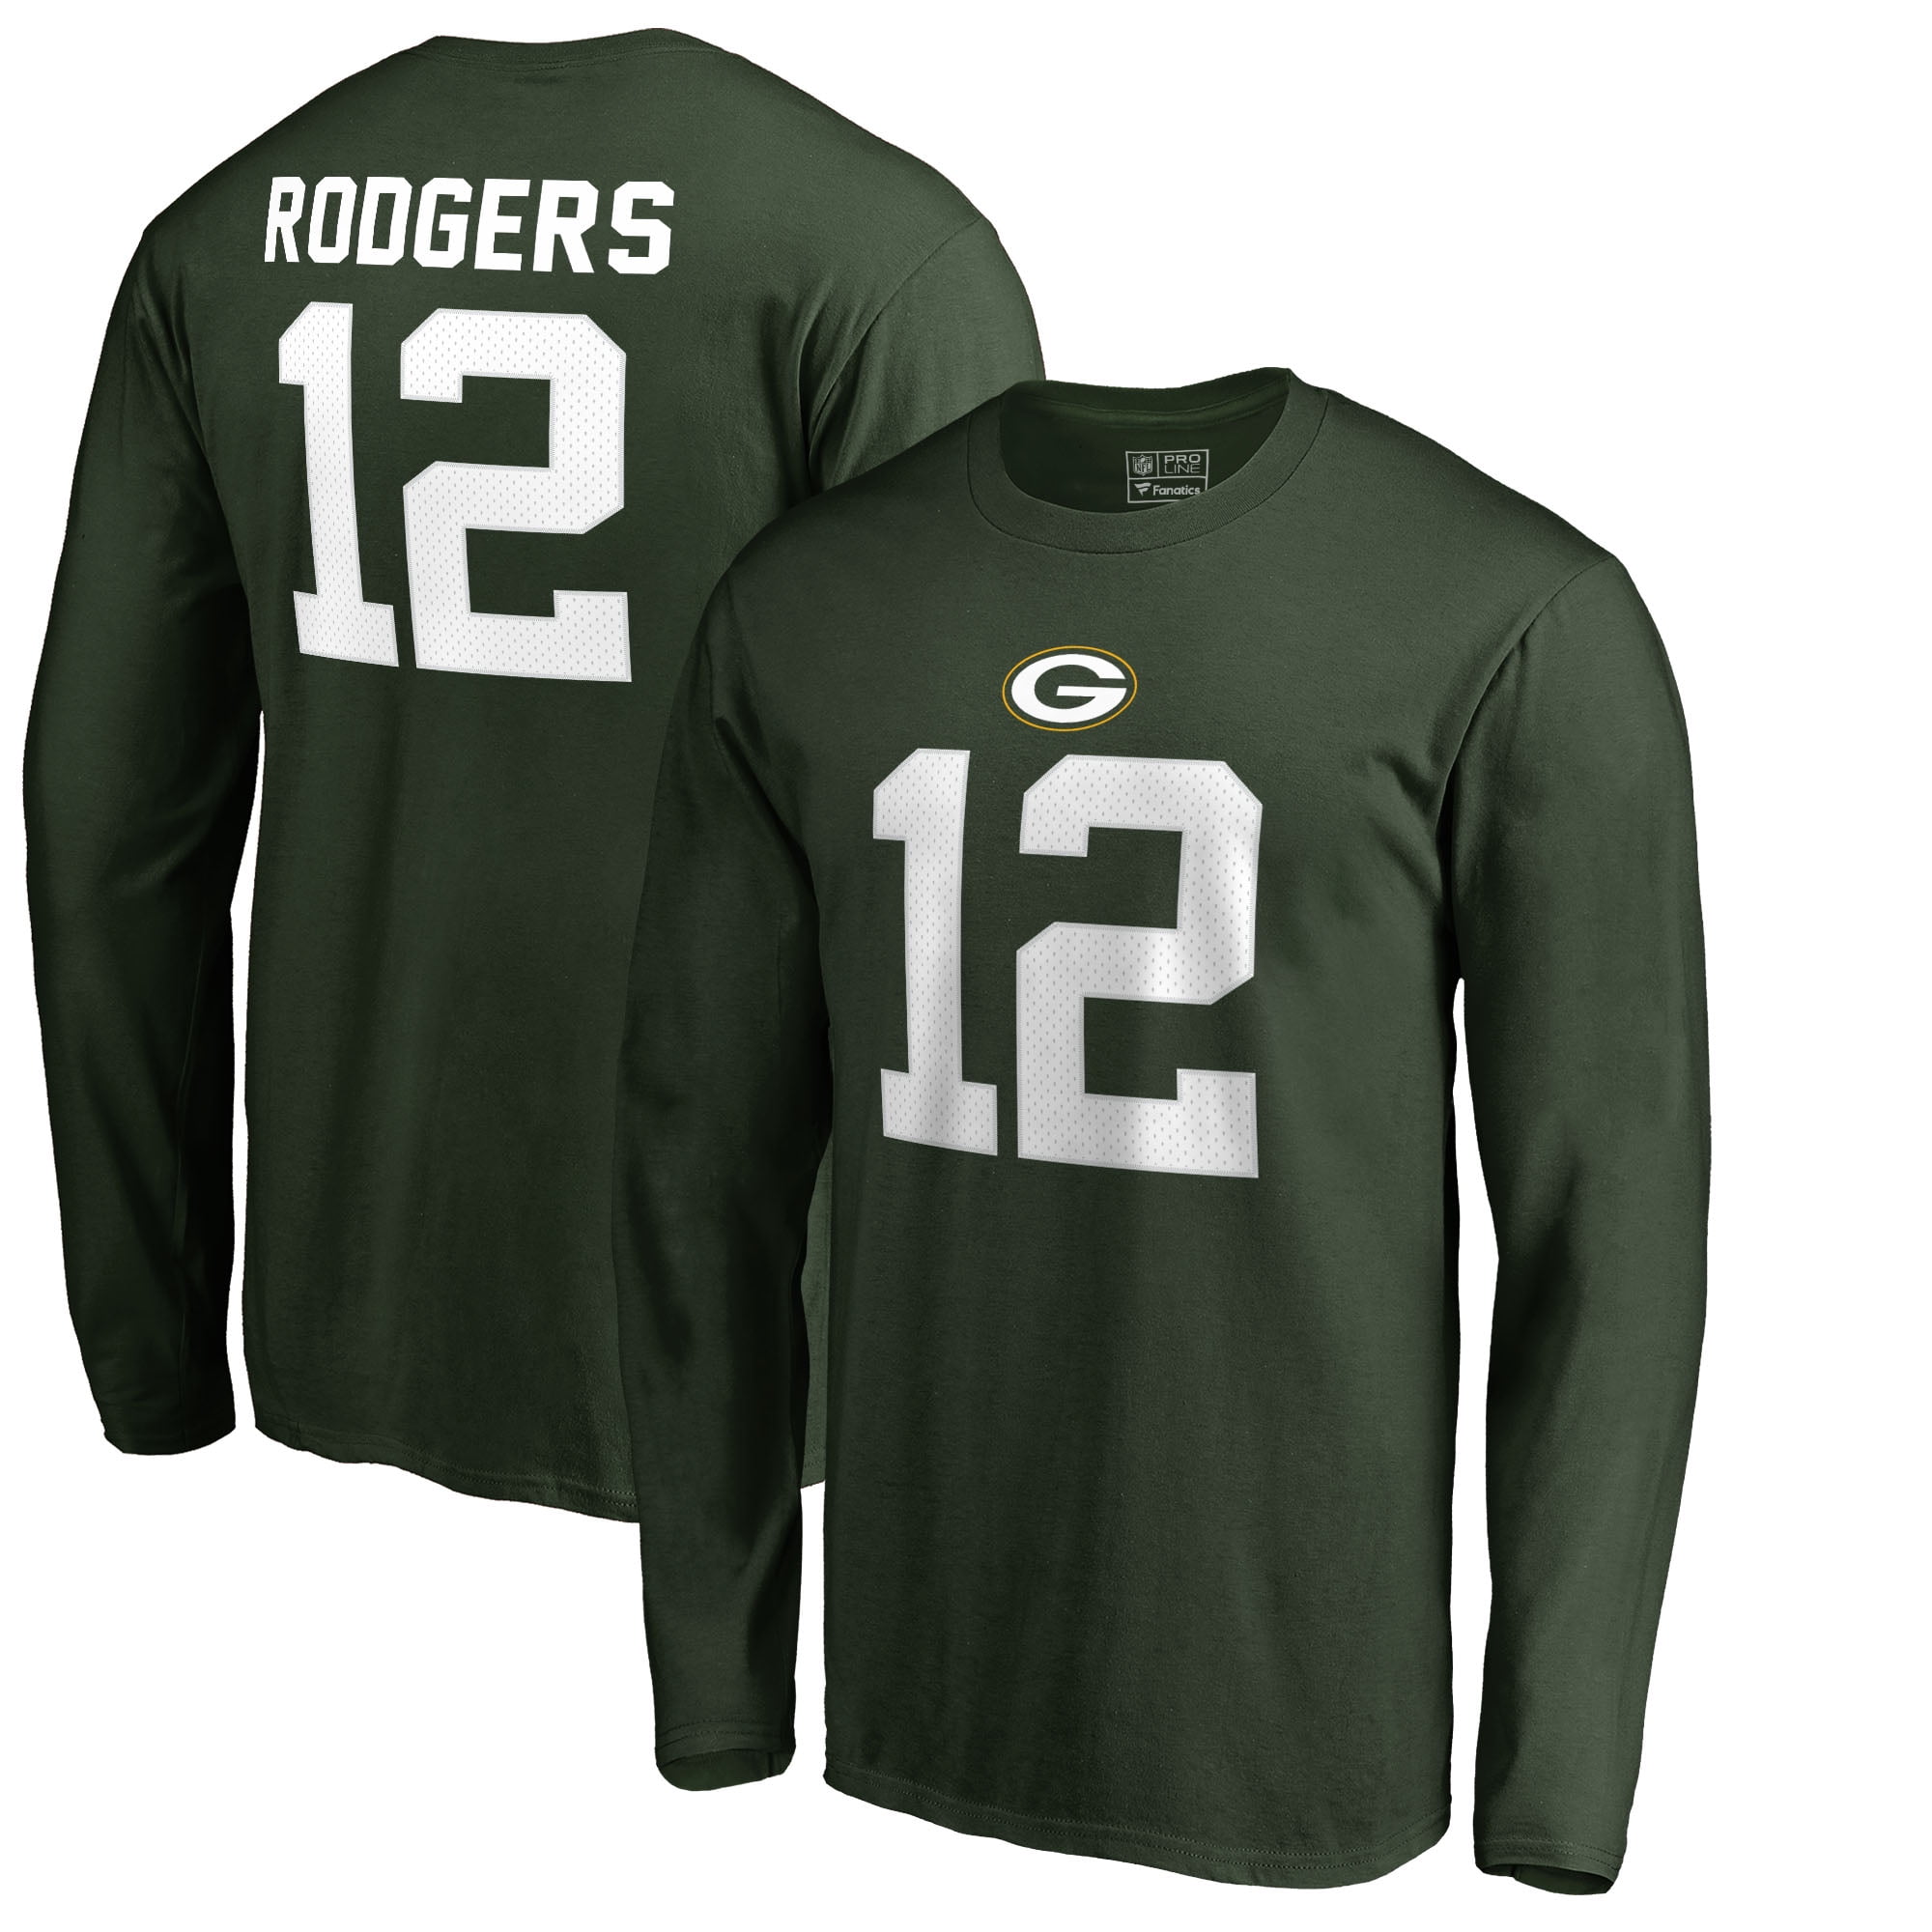 Aaron Rodgers Green Bay Packers NFL Pro Line by Fanatics Branded ...